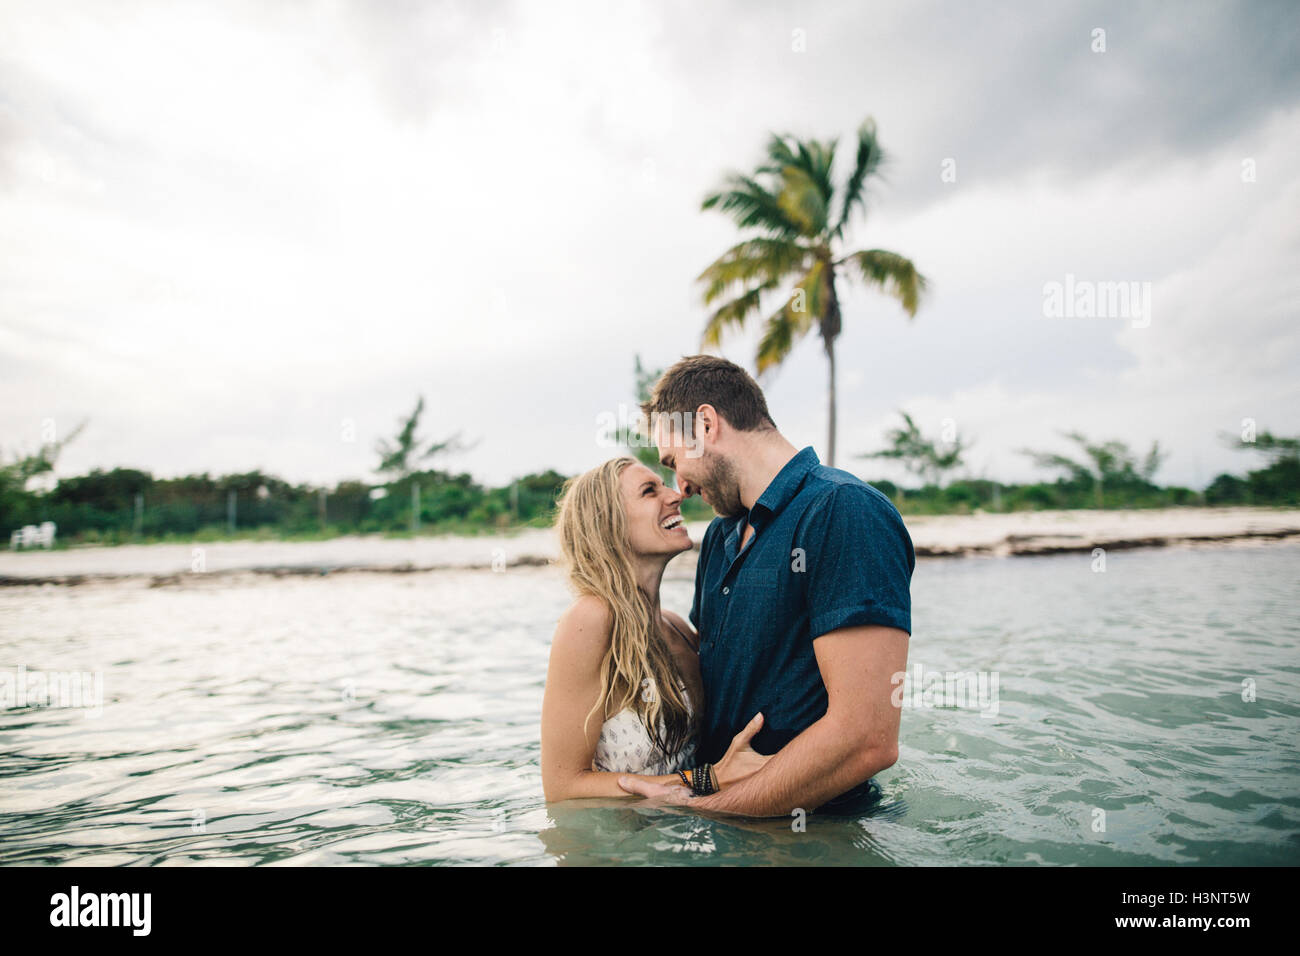 Couple waist deep in water face to face smiling Stock Photo